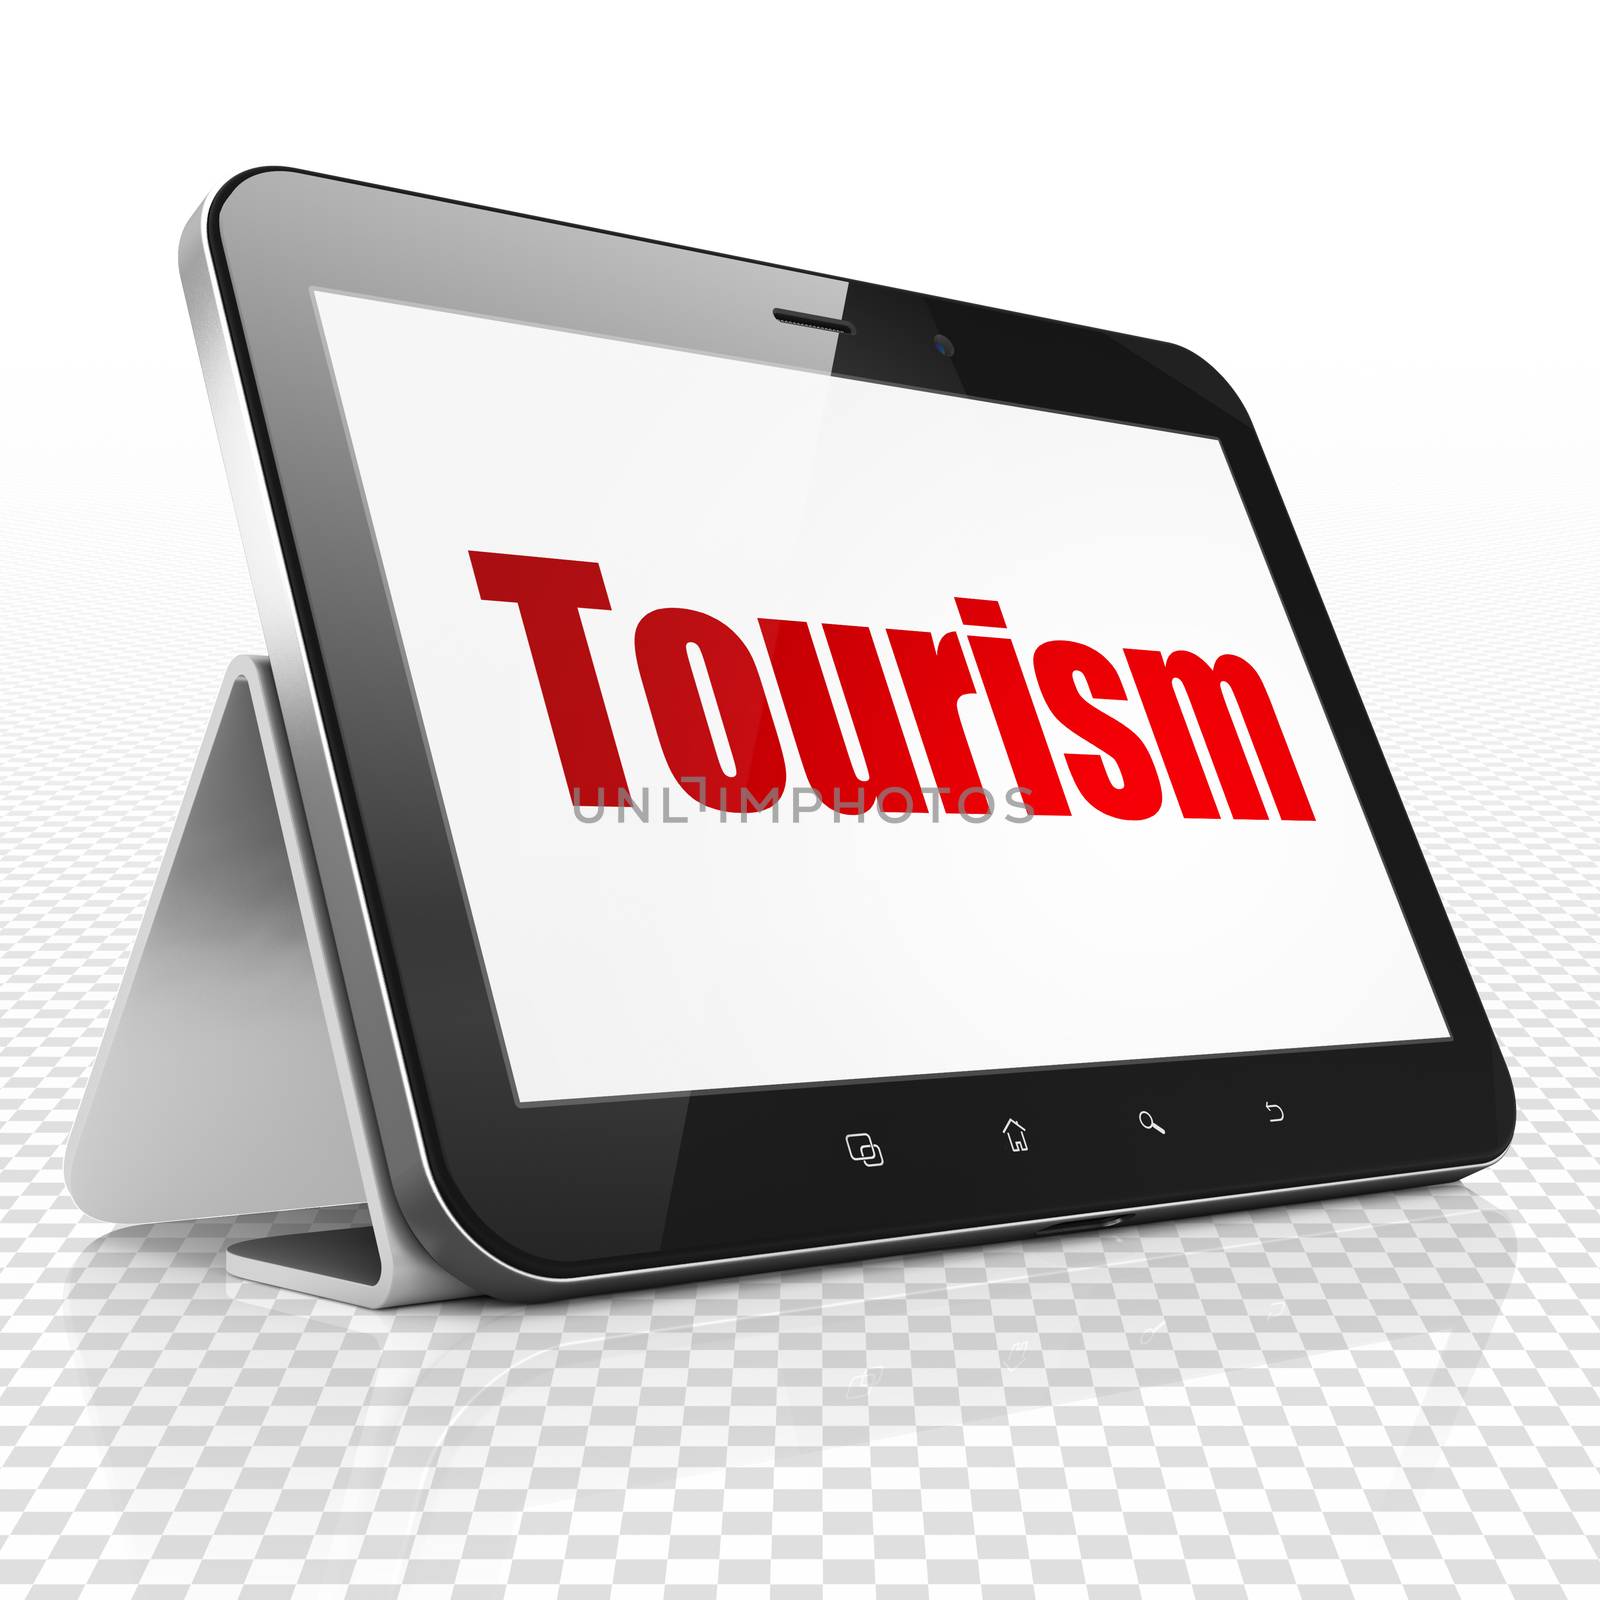 Tourism concept: Tablet Computer with red text Tourism on display